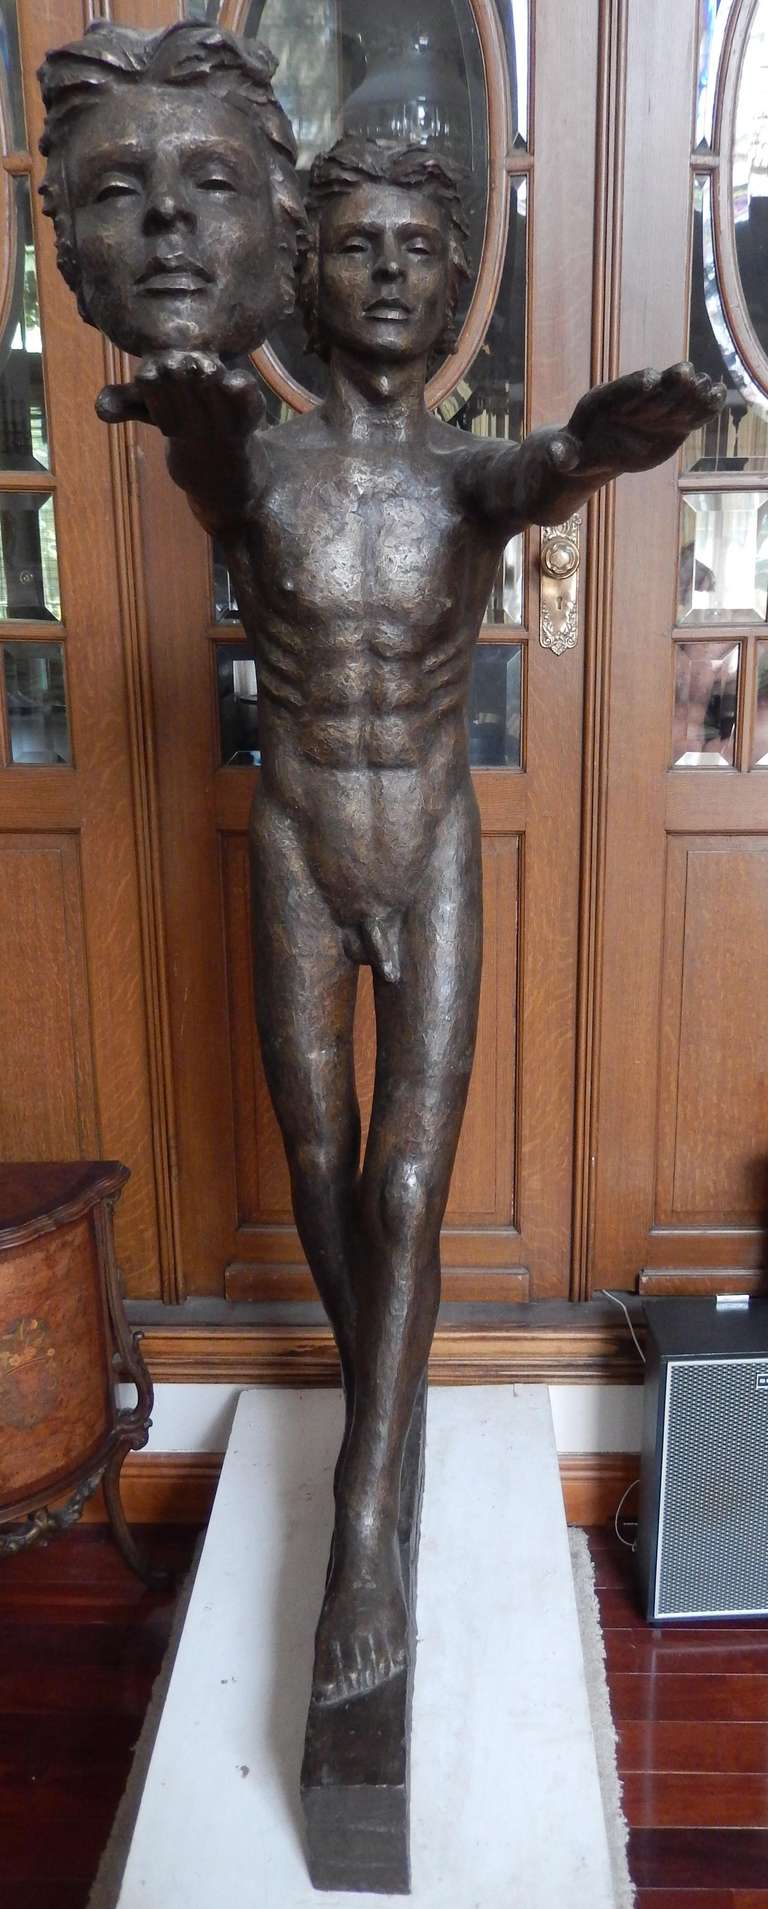 Enormous bronze sculpture by noted sculptor Victor Salmones, dating to 1981, and numbered 4 out of 10 produced. 

Titled 